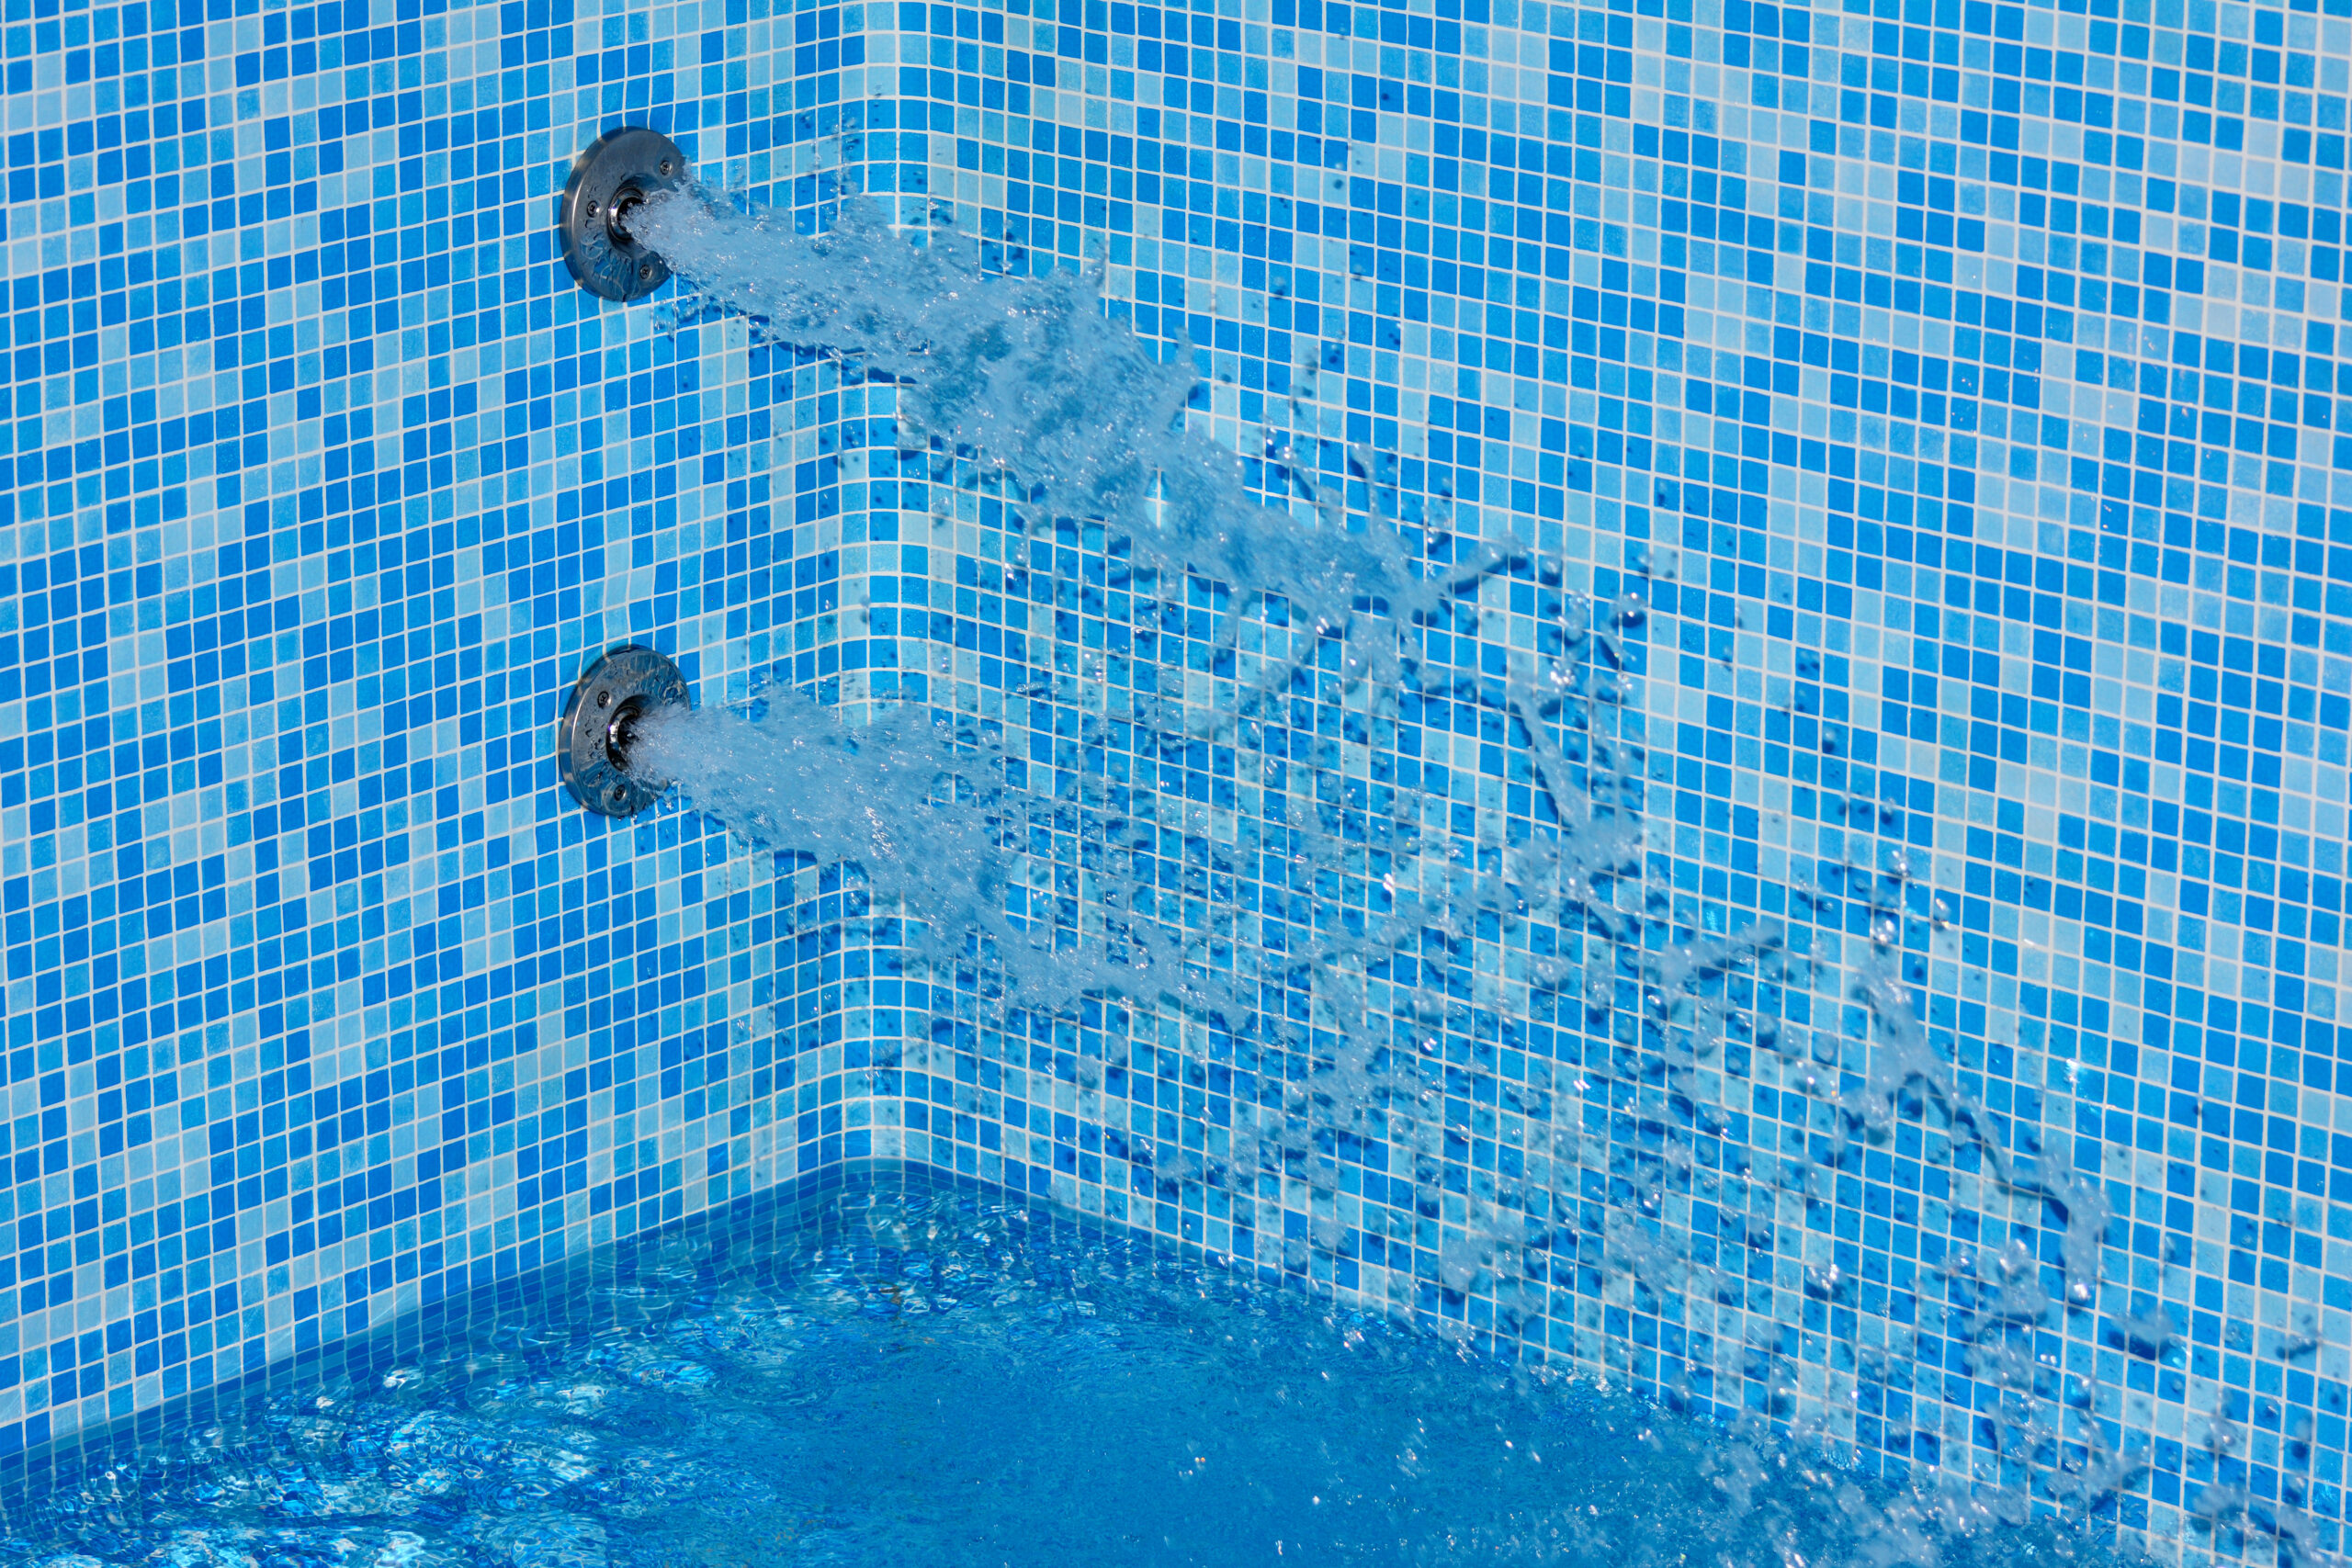 Pool bubblers, underwater fixtures that release streams of water into the pool